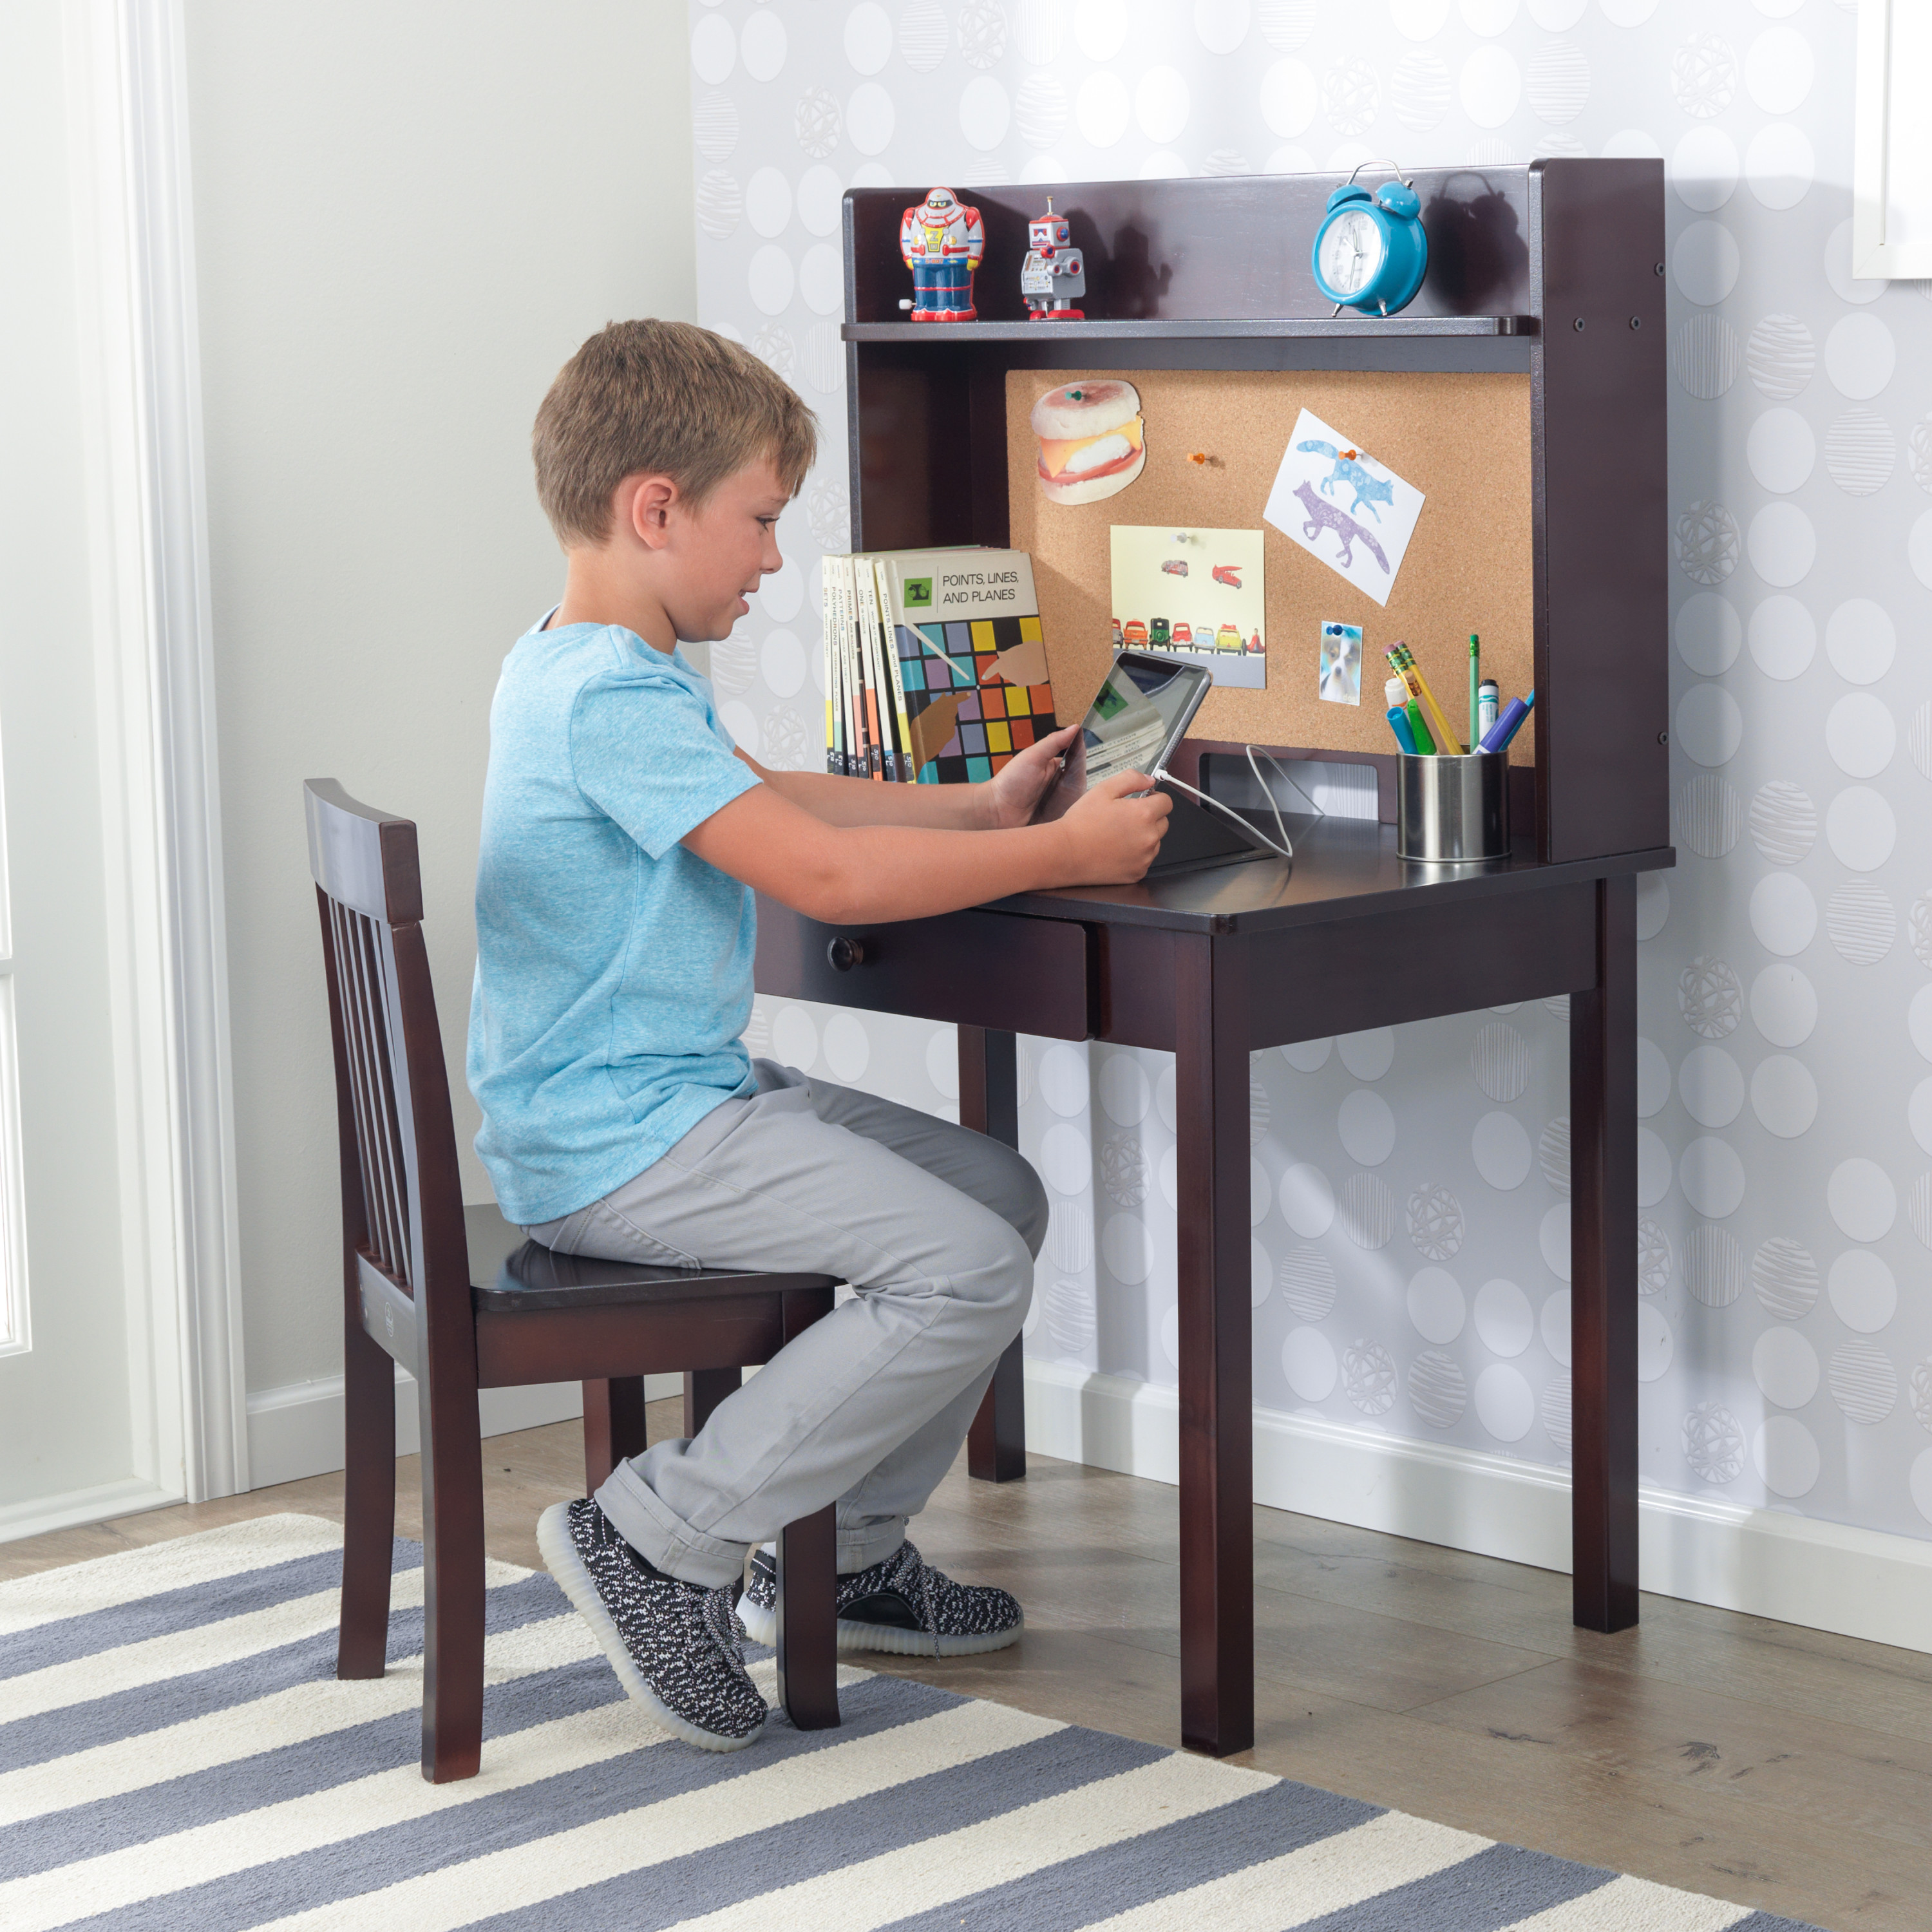 KidKraft Pinboard Wooden Desk with Drawer, Hutch, Shelf and Chair, Espresso - image 8 of 10